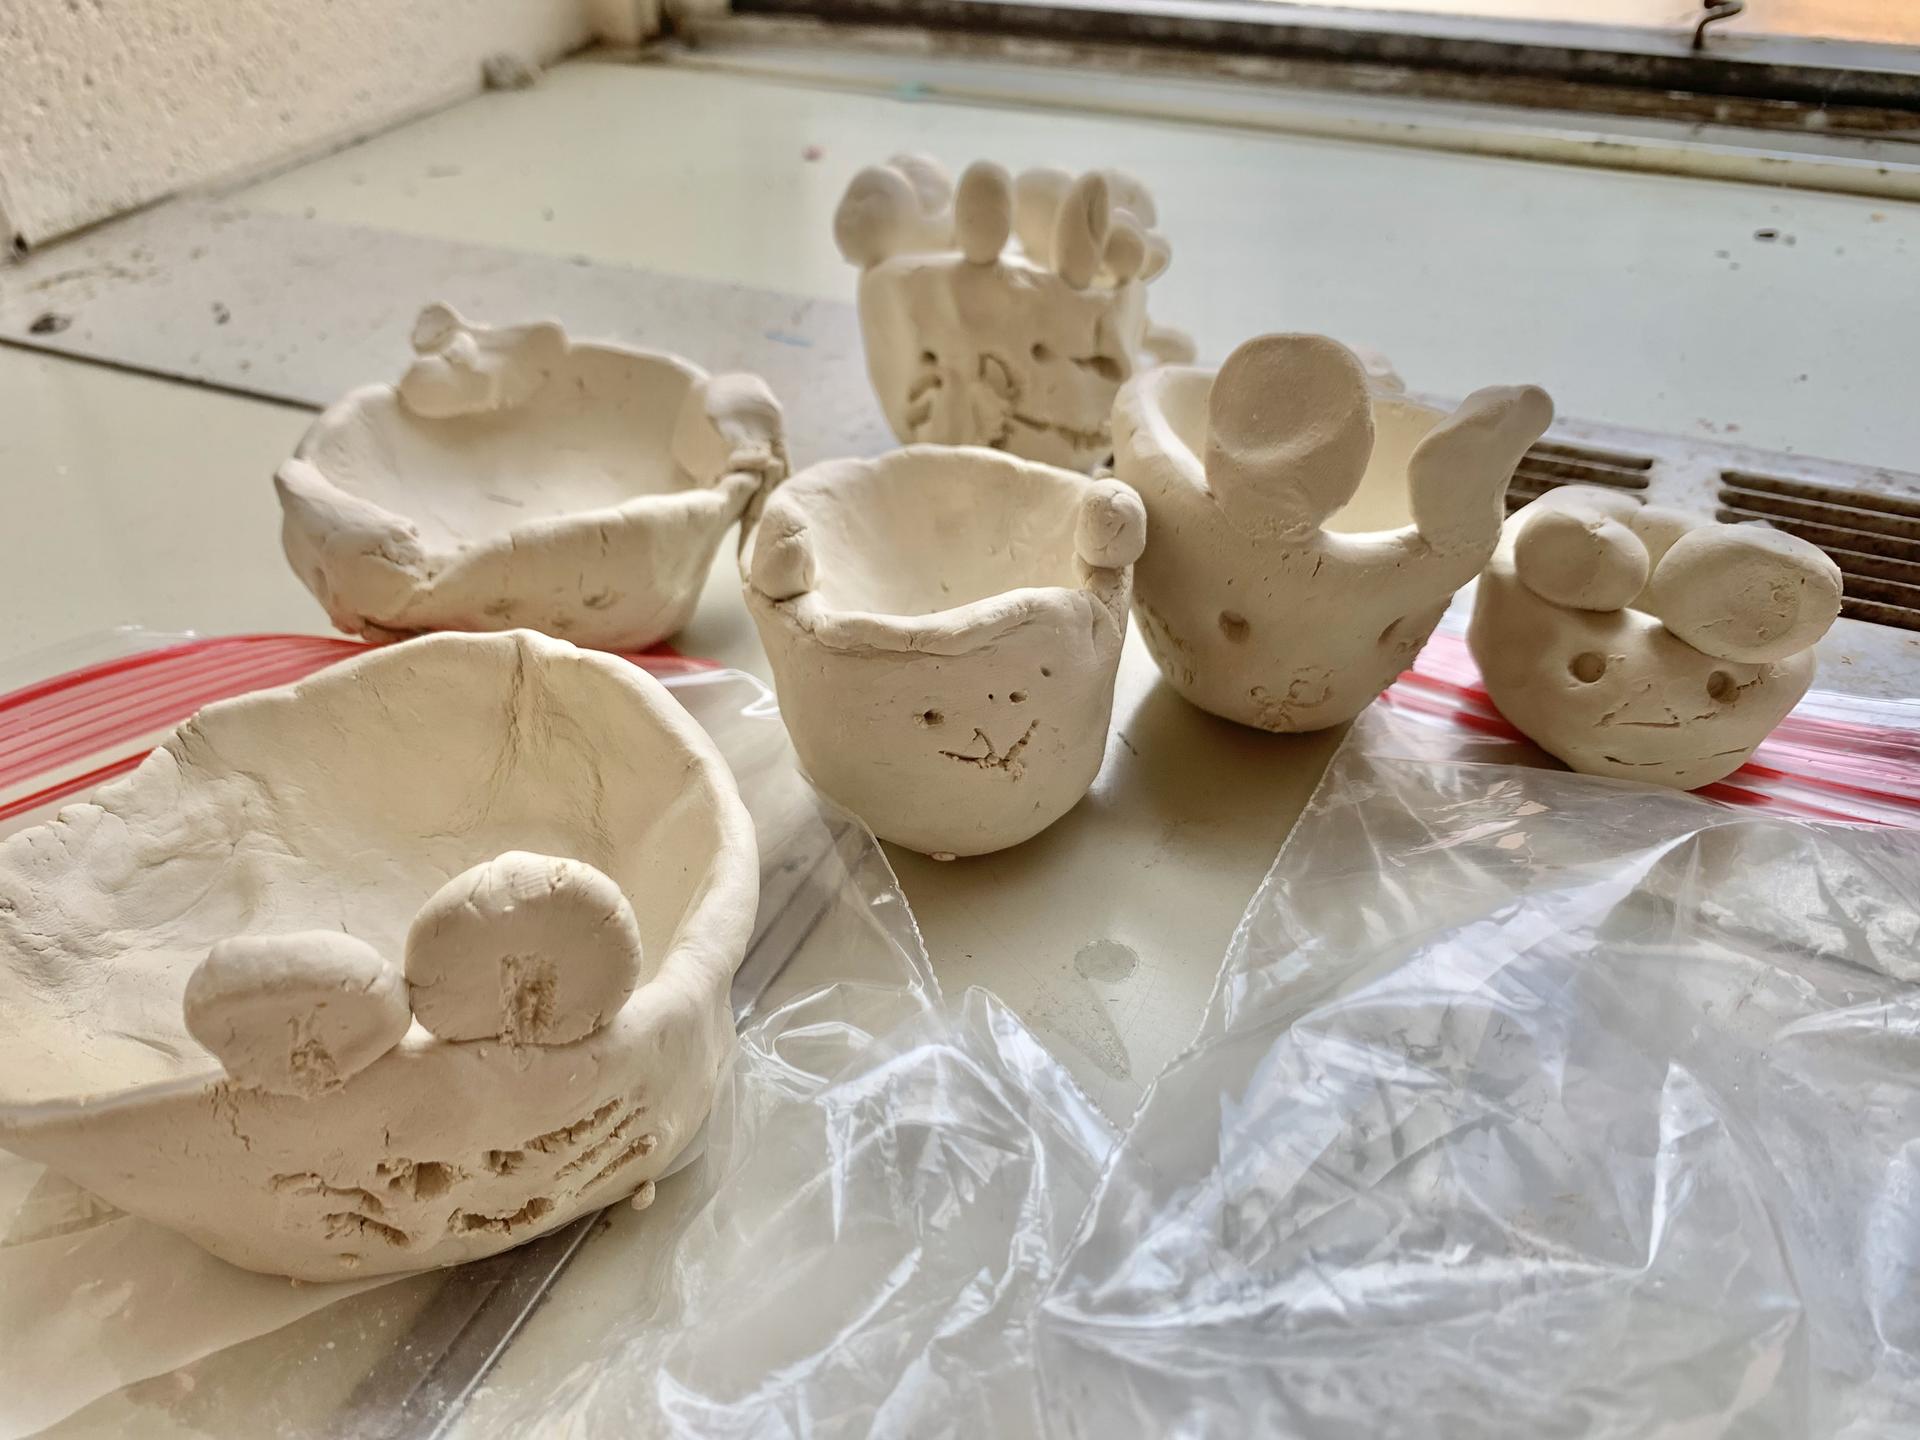 Variously sized pinch pots that represent different items that the children deemed important to them